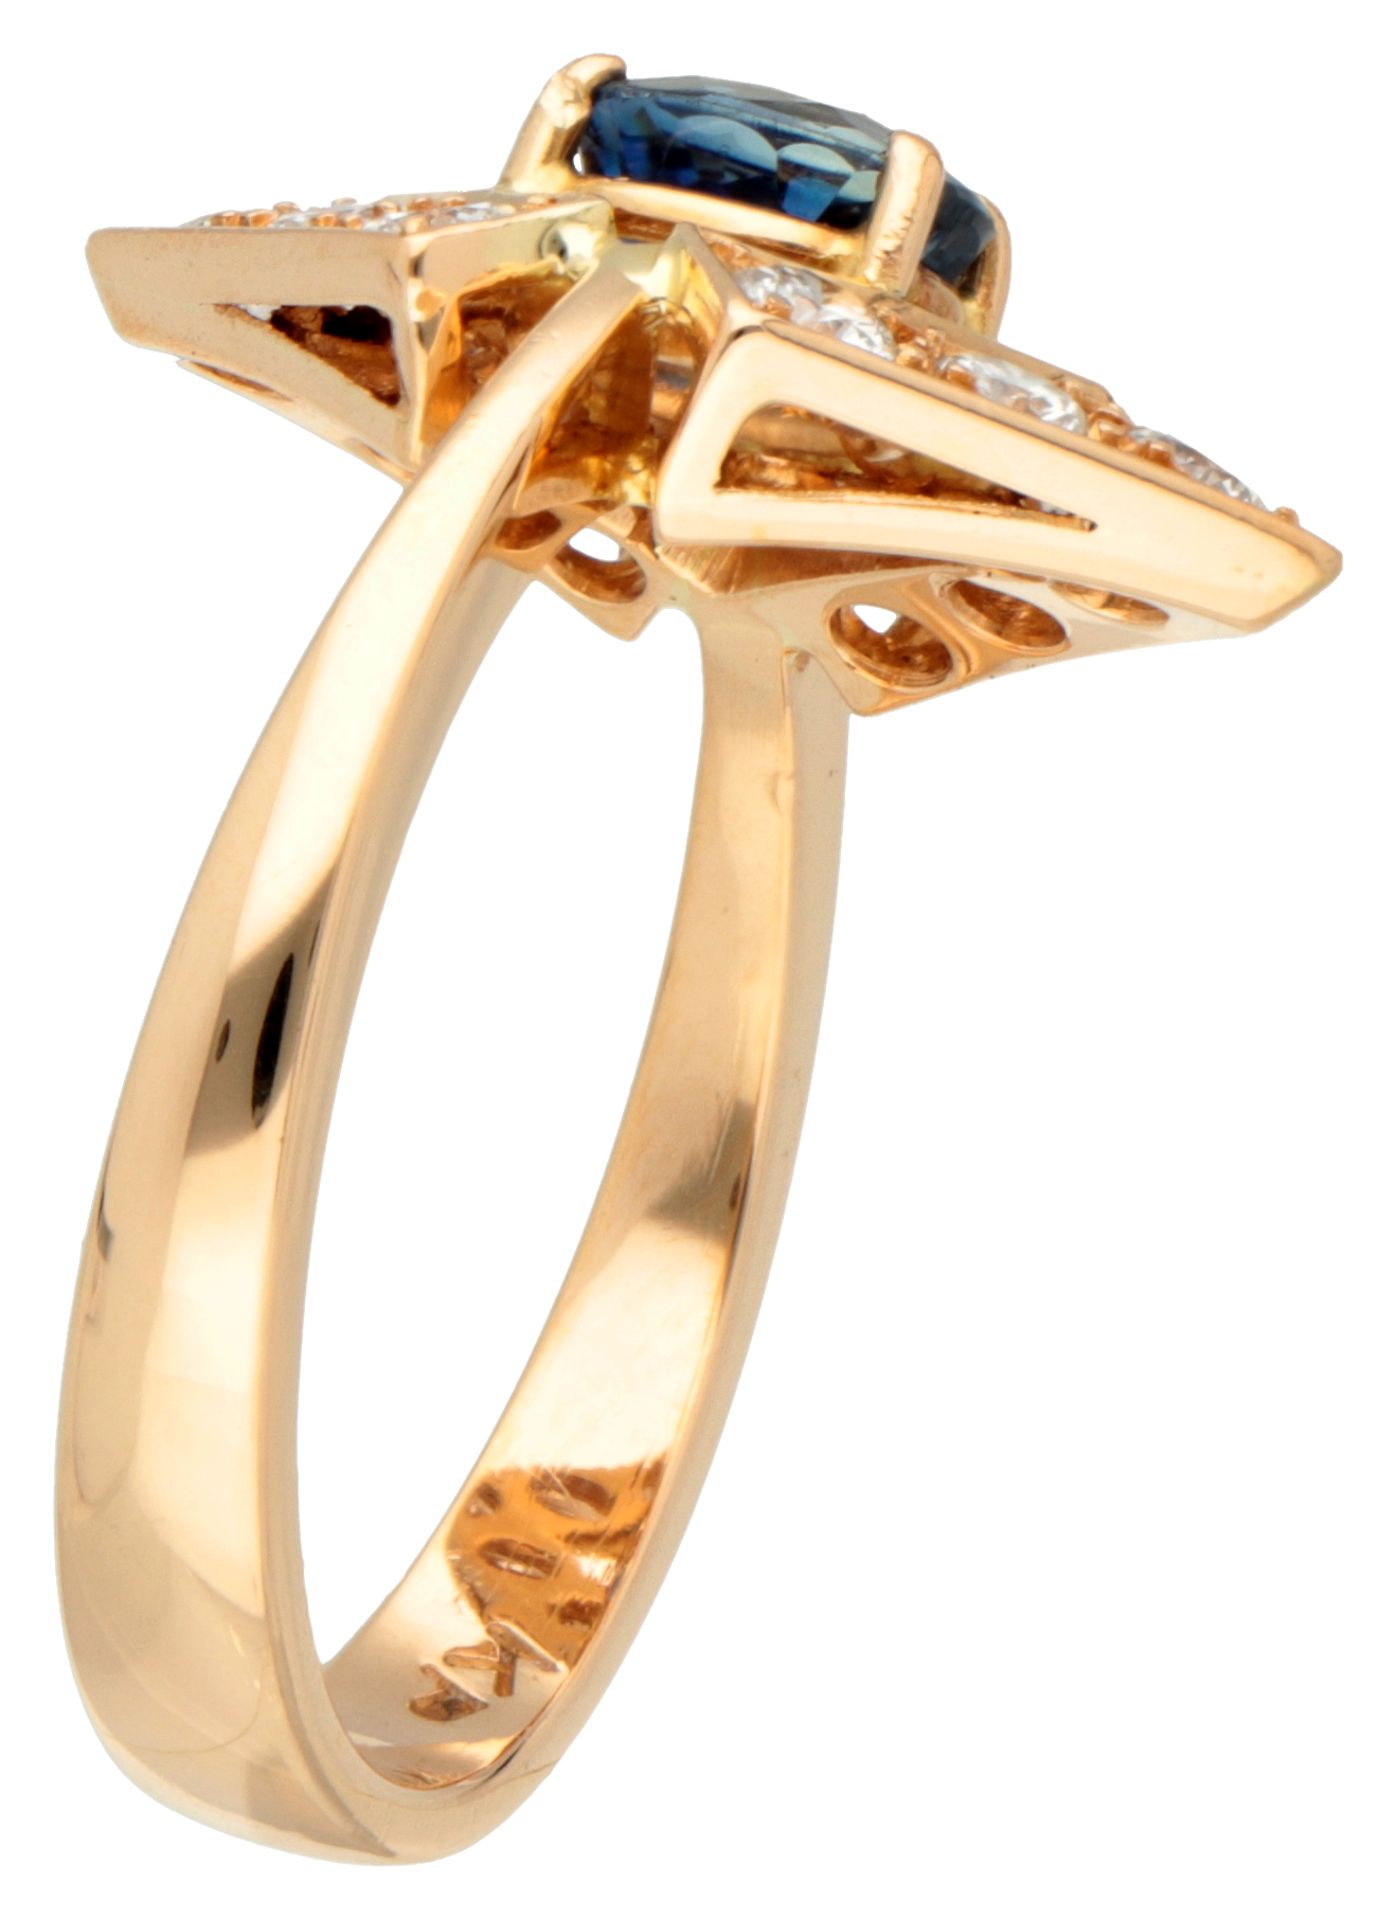 18k Yellow gold entourage ring set with synthetic sapphire and diamonds. - Image 2 of 2